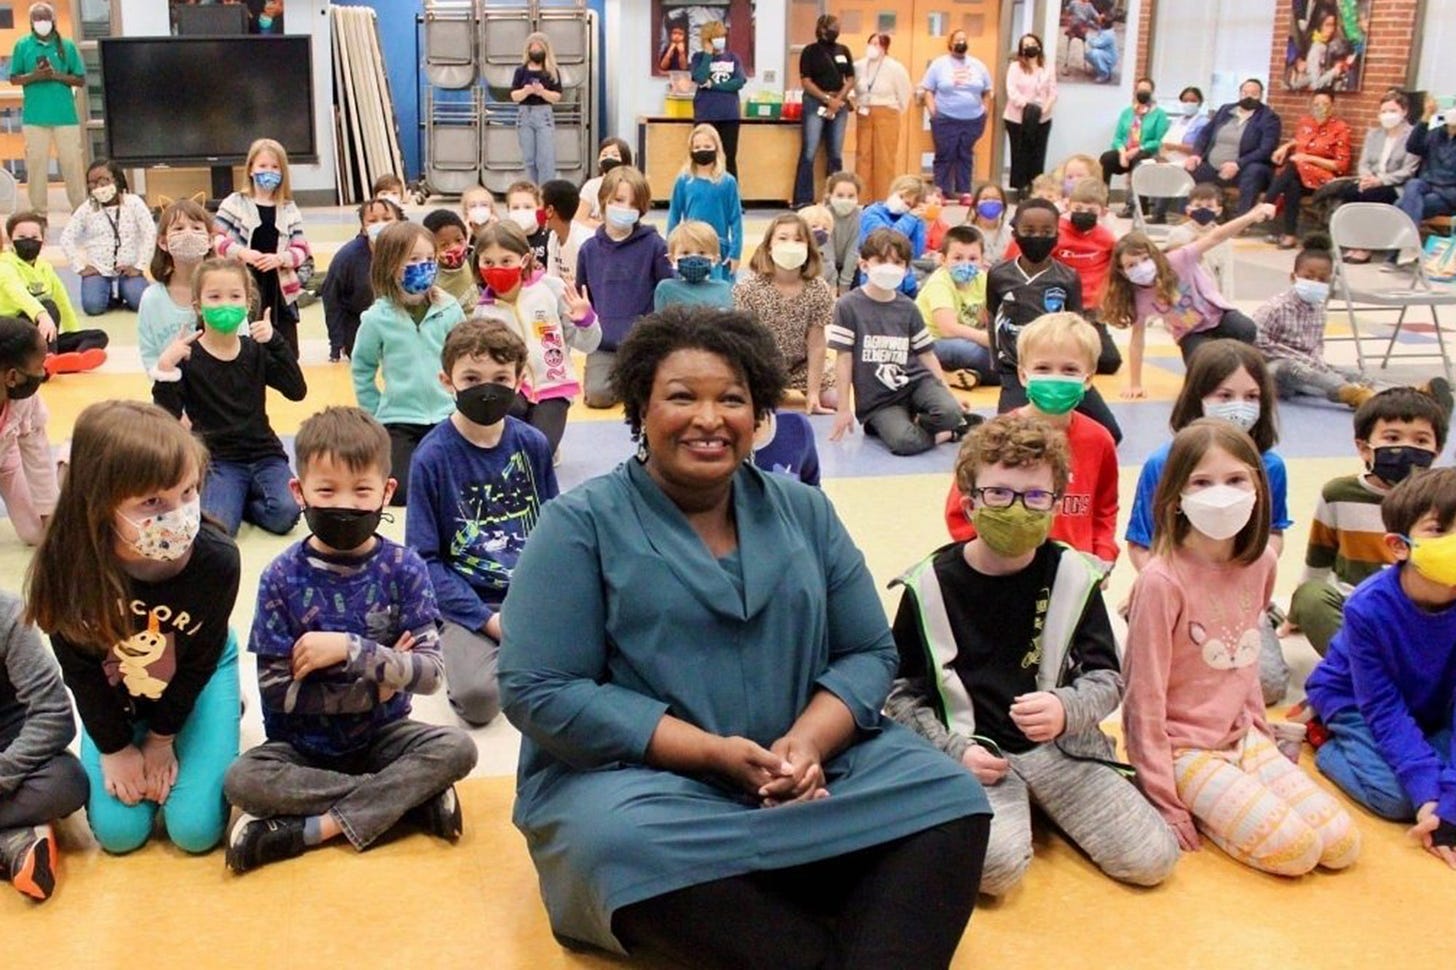 Stacey Abrams slammed for maskless pic surrounded by masked kids